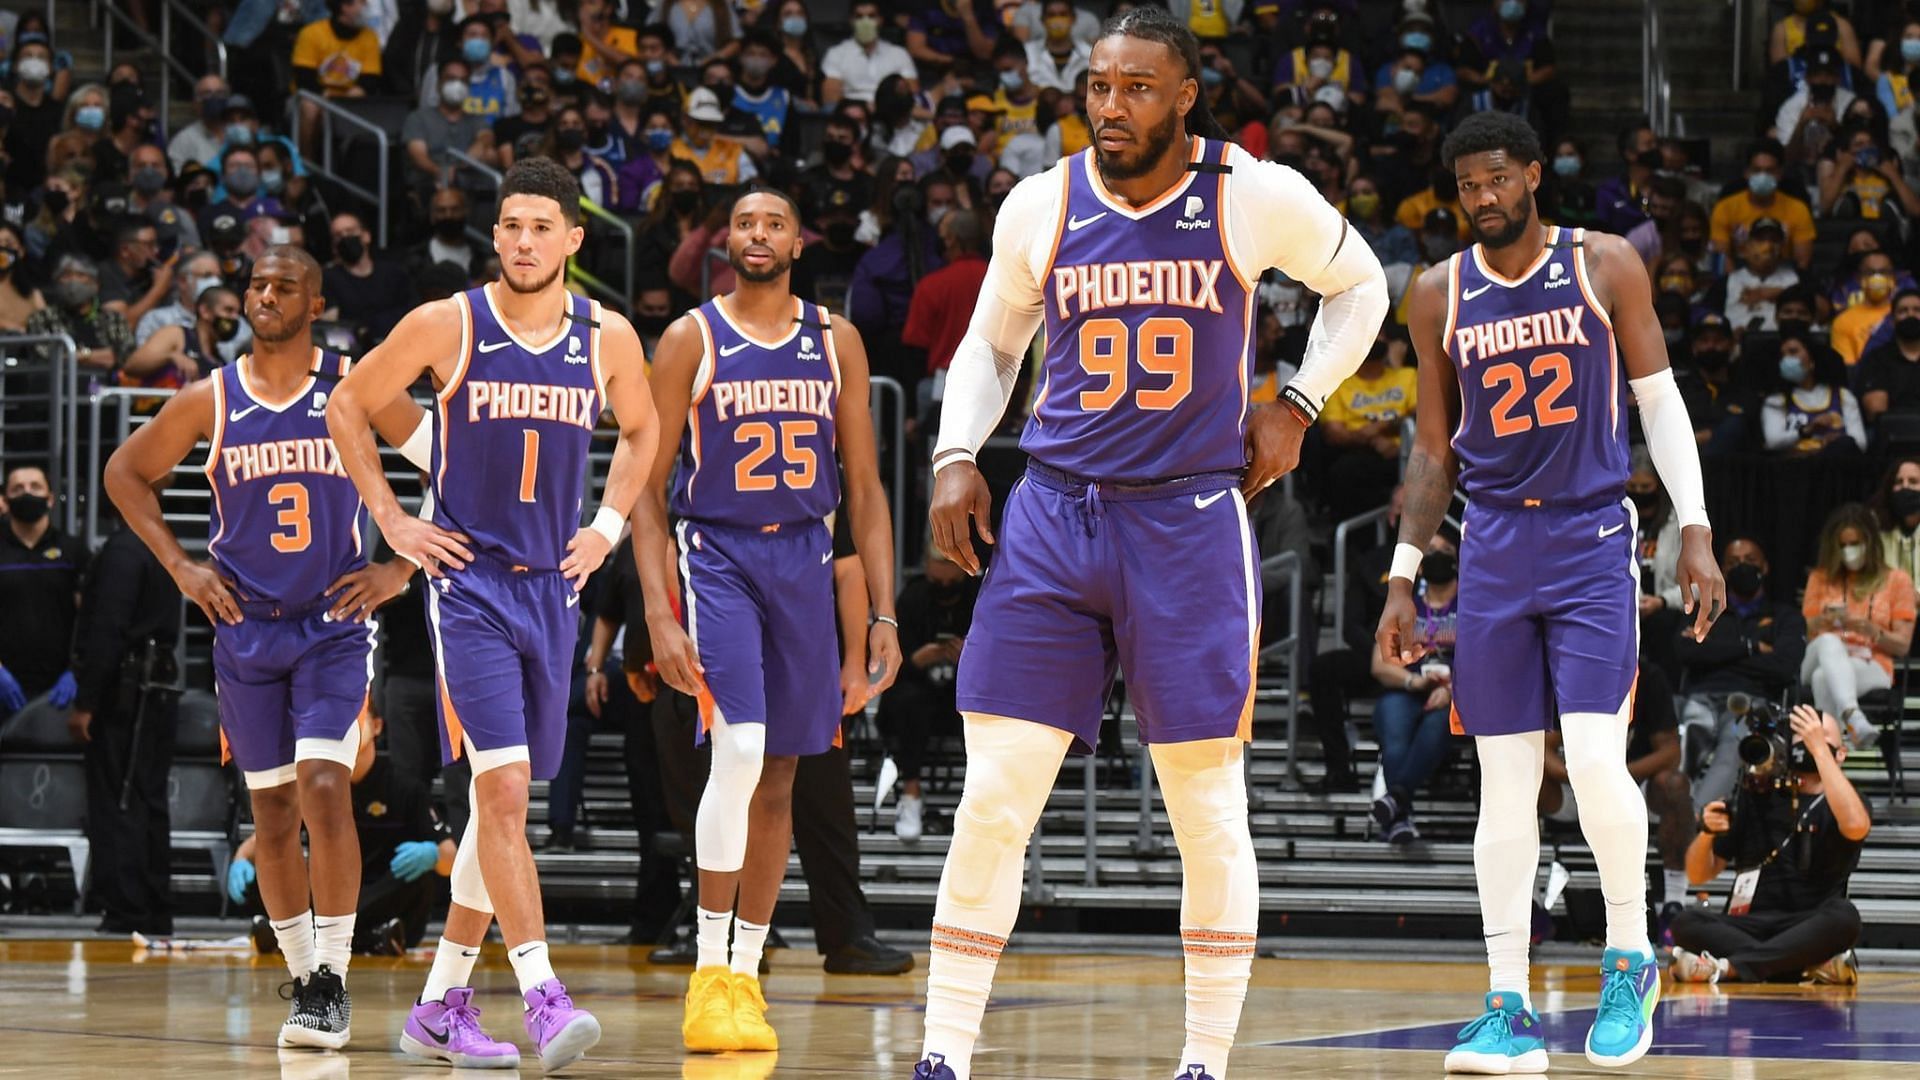 The Phoenix Suns own the best record in the NBA right now. [Photo: Sky Sports]